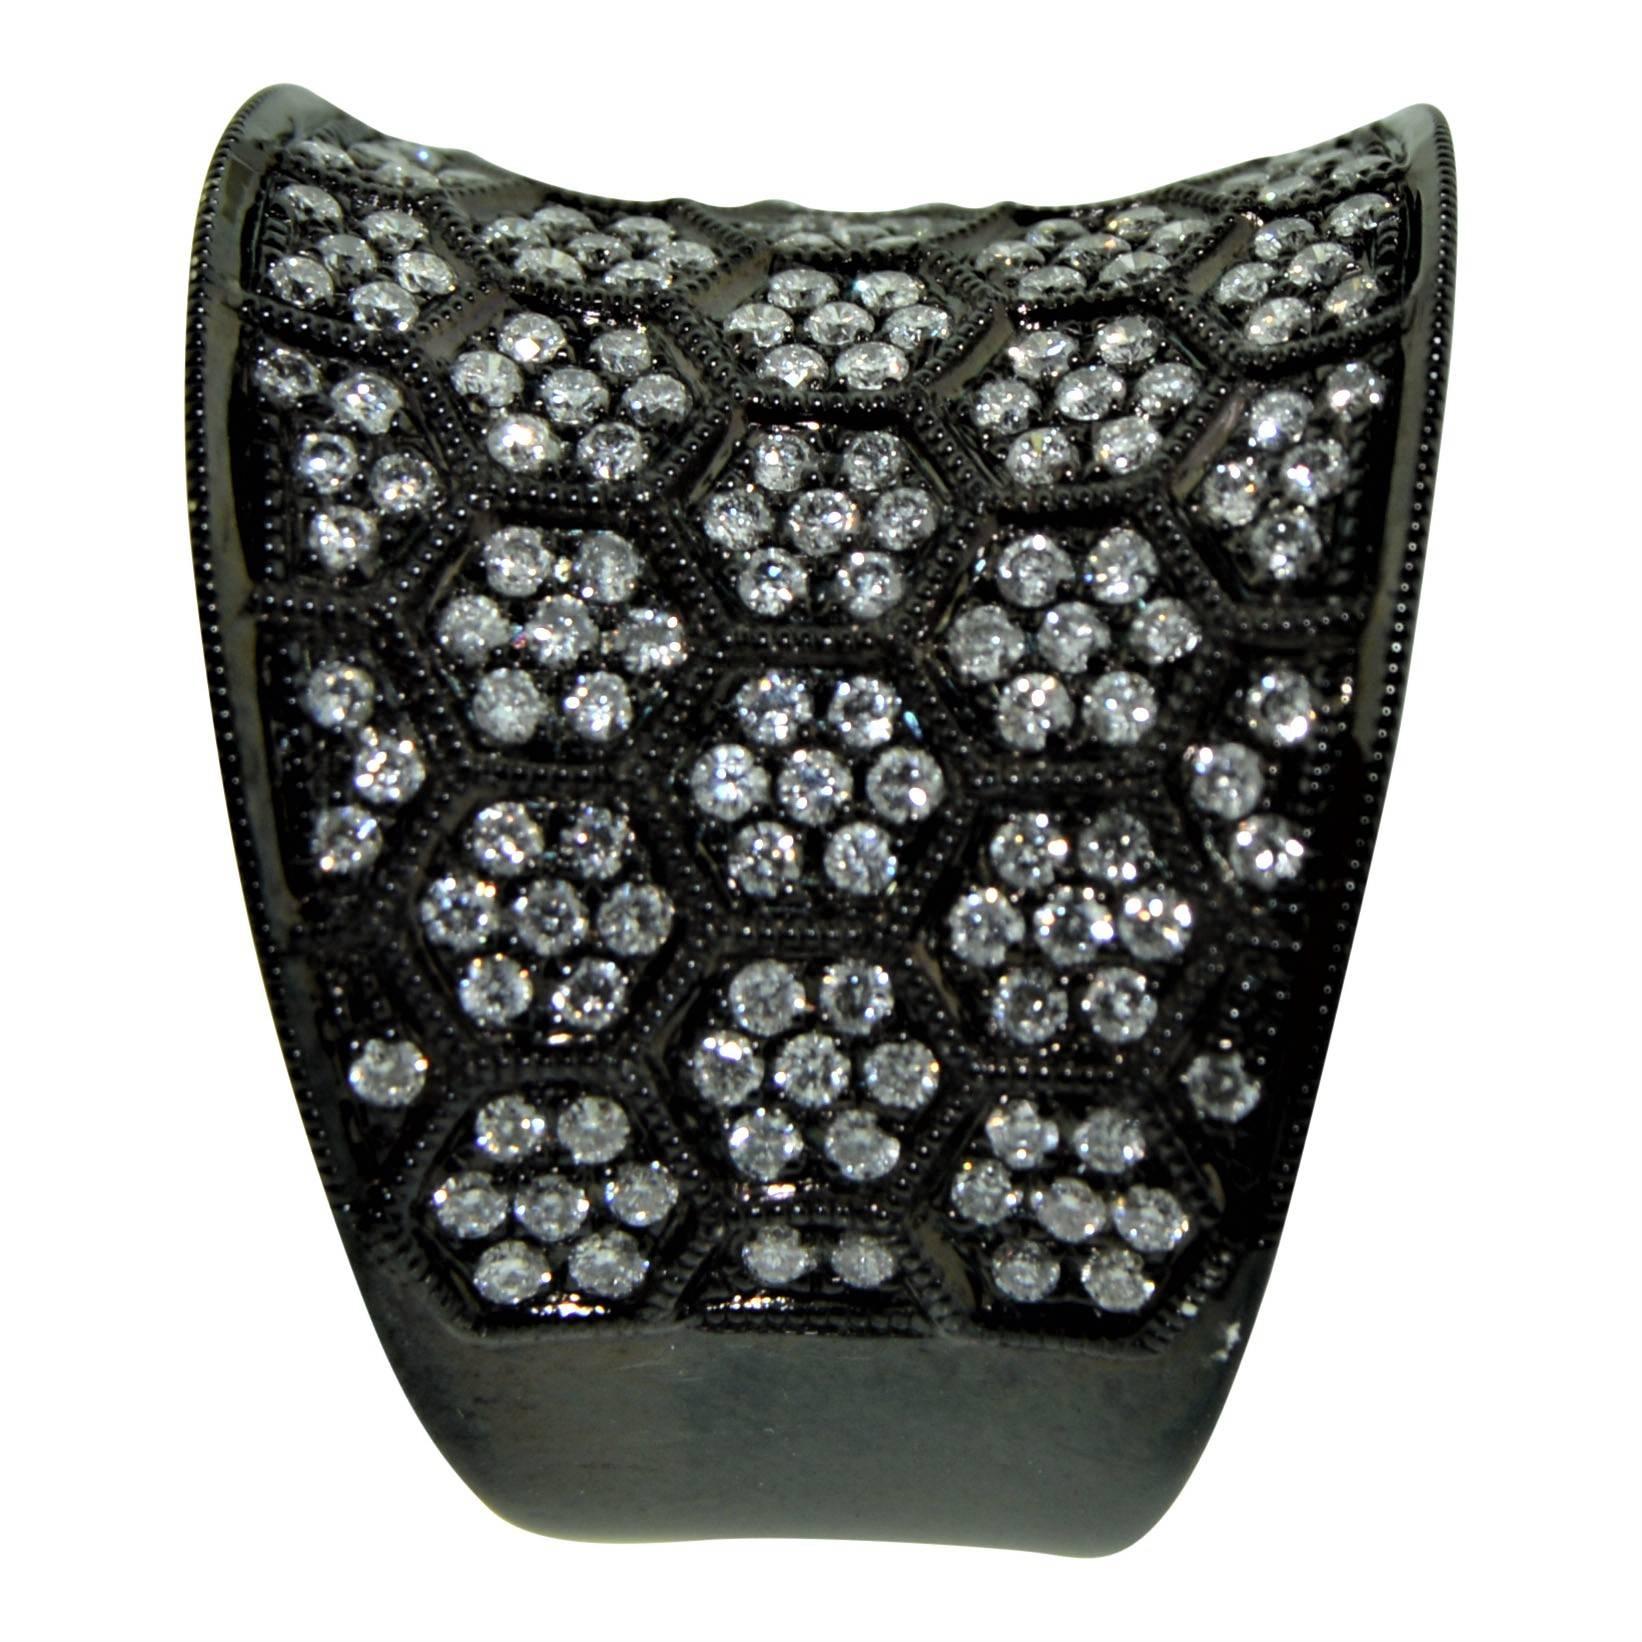 This rich and vibrant, oversized, concave band is just fun! Beautifully made of 18K white gold with a charcoal color anodized finish, is adorned by tiny diamond clusters totaling 1.50cts, flush set within a honeycomb pattern detailed by a fine